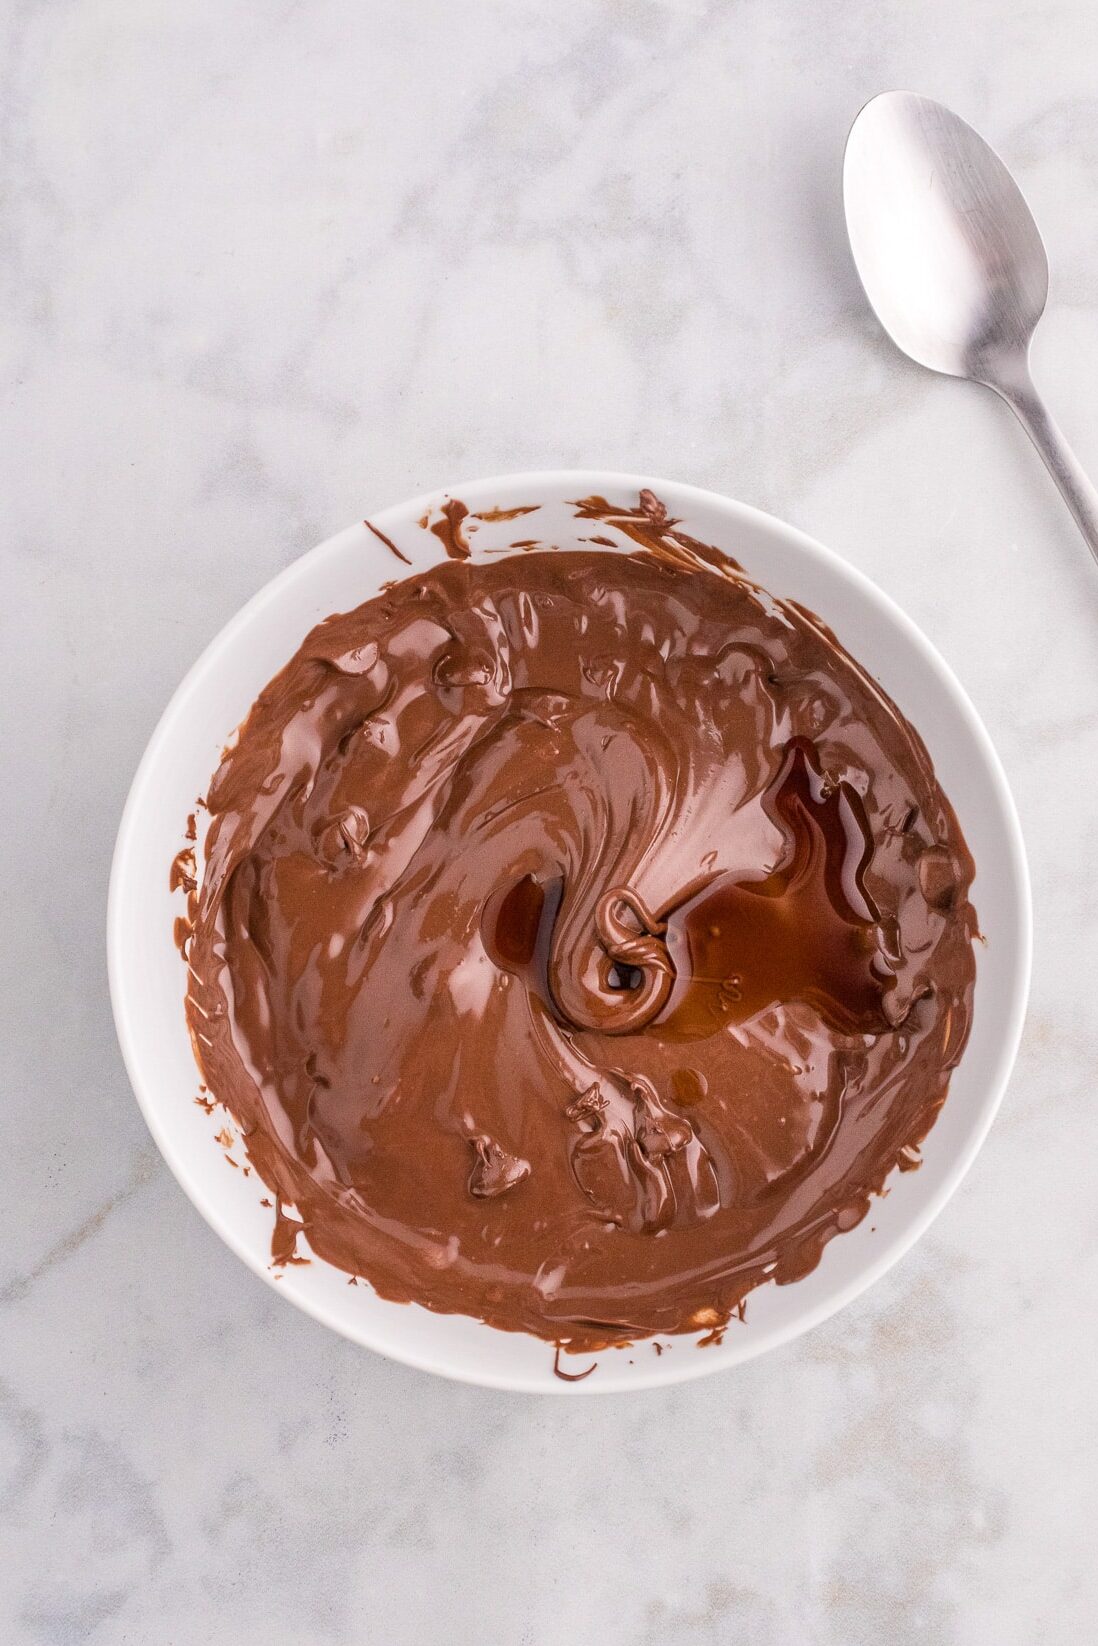 A bowl of melted chocolate sauce with a spoon next to it before stirring.